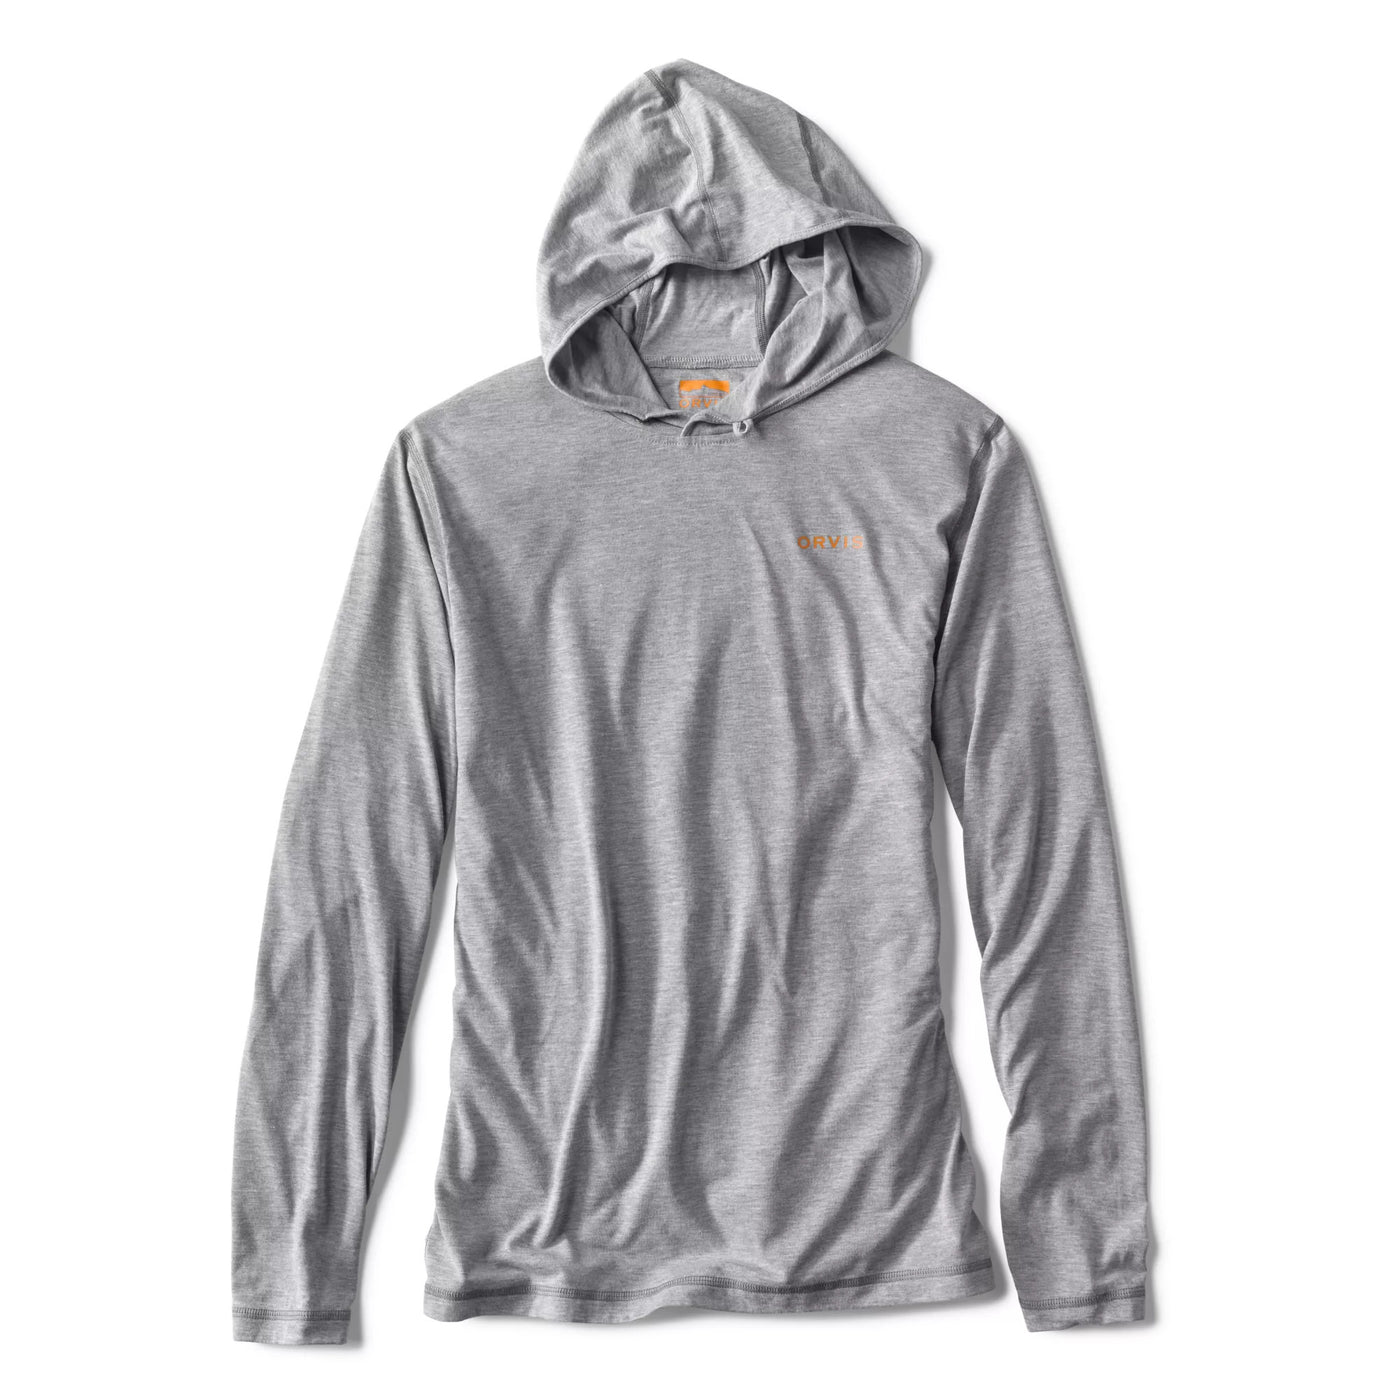 Orvis DriRelease Pull-Over Hoodie-MENS CLOTHING-Light Heather-S-Kevin's Fine Outdoor Gear & Apparel